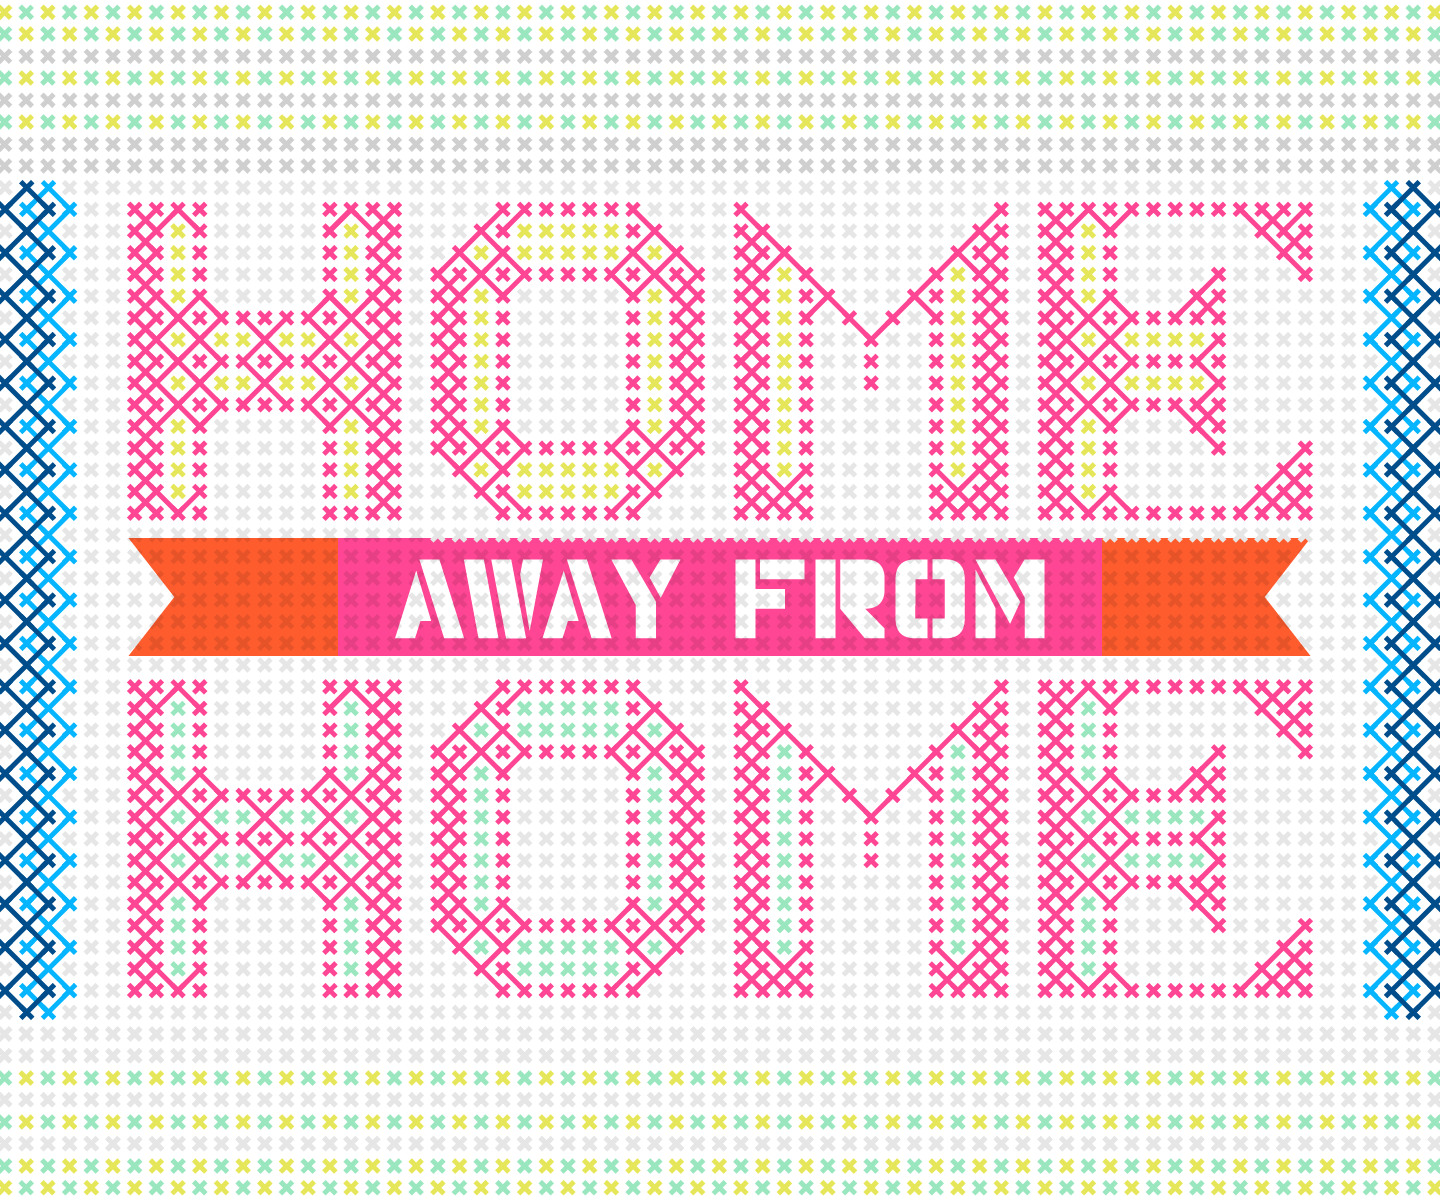 Home away from home cross stitch vector art